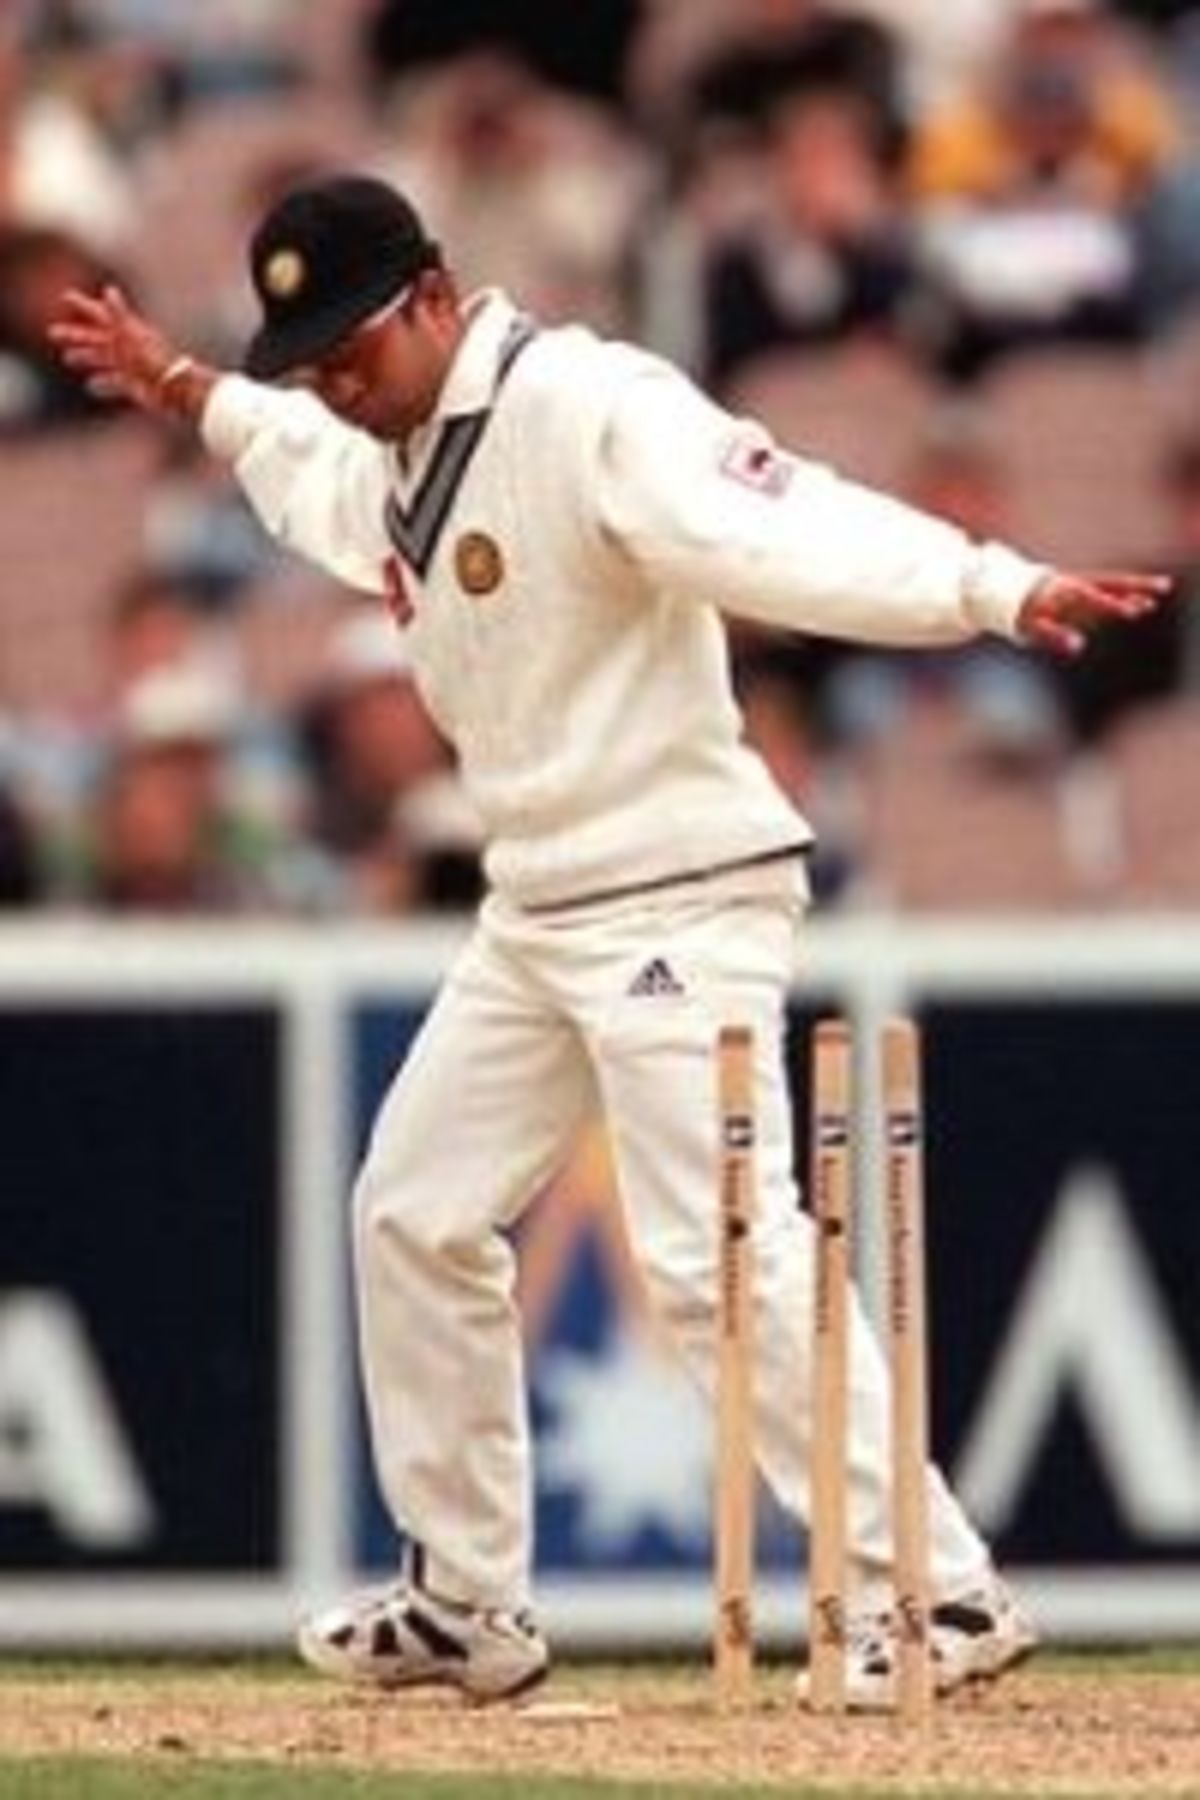 28 Dec 1999: Sachin Tendulkar of India stands over the stumps as Glenn McGrath of Australia is run out, on day three of the second test match between Australia and India, played at the Melbourne Cricket Ground, Melbourne, Australia. Glenn McGrath was run out for two runs.